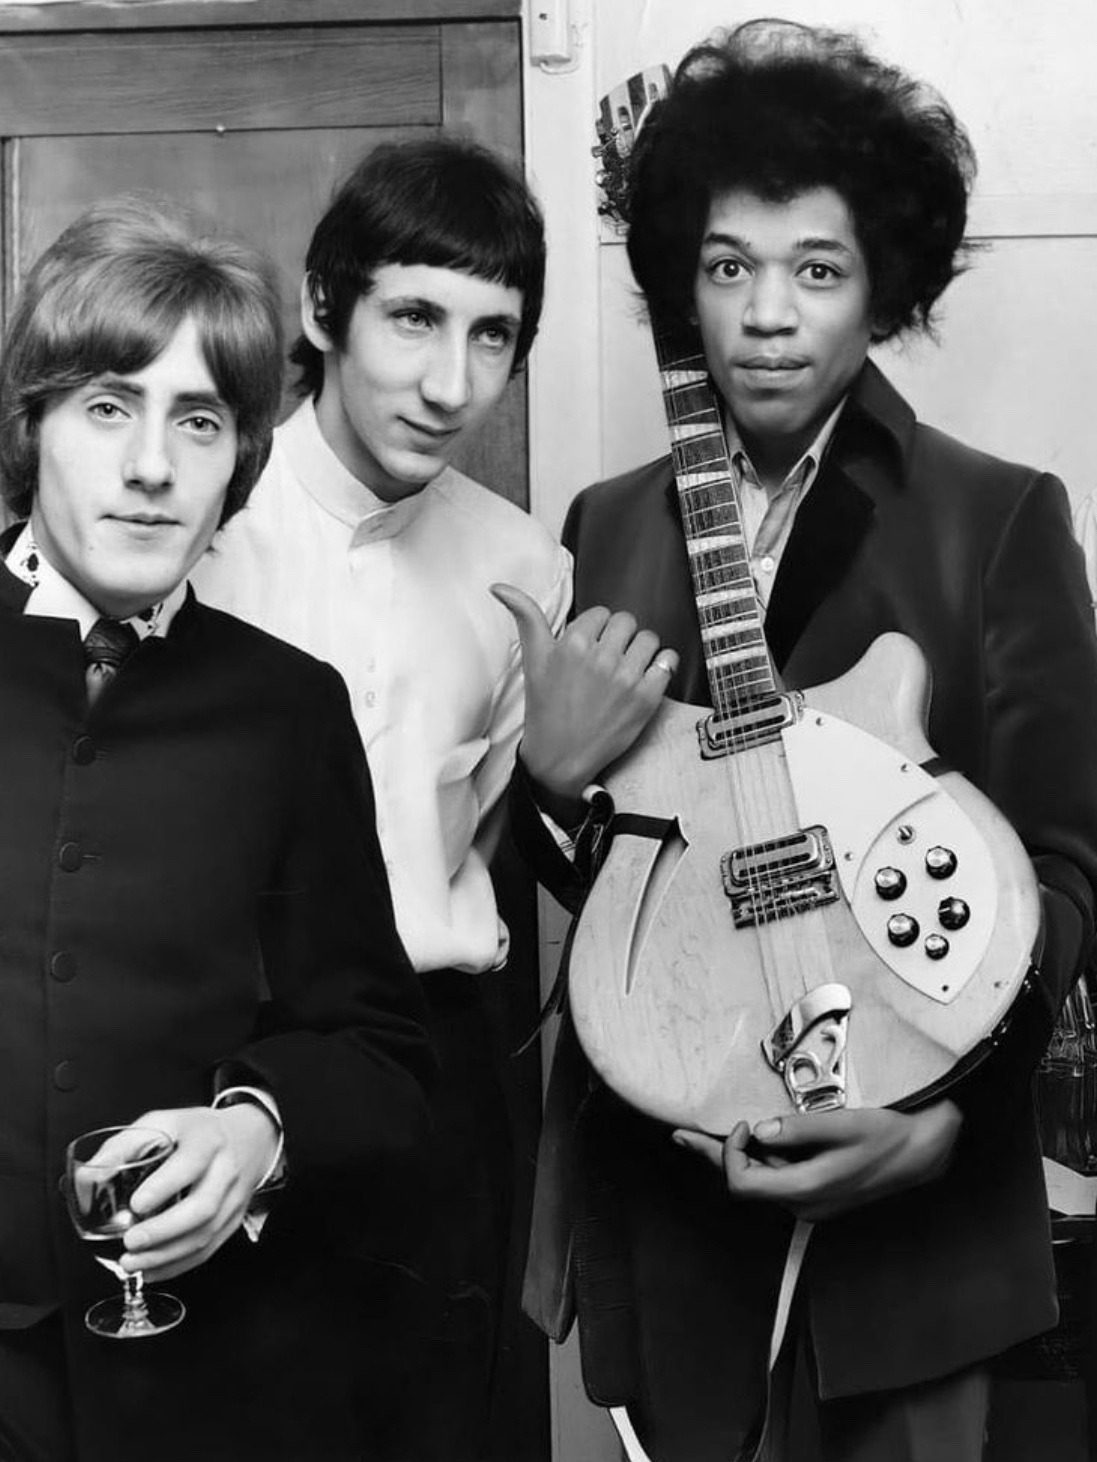 Jimi Hendrix with Pete Townsend and Roger Daltrey of The Who, 1967